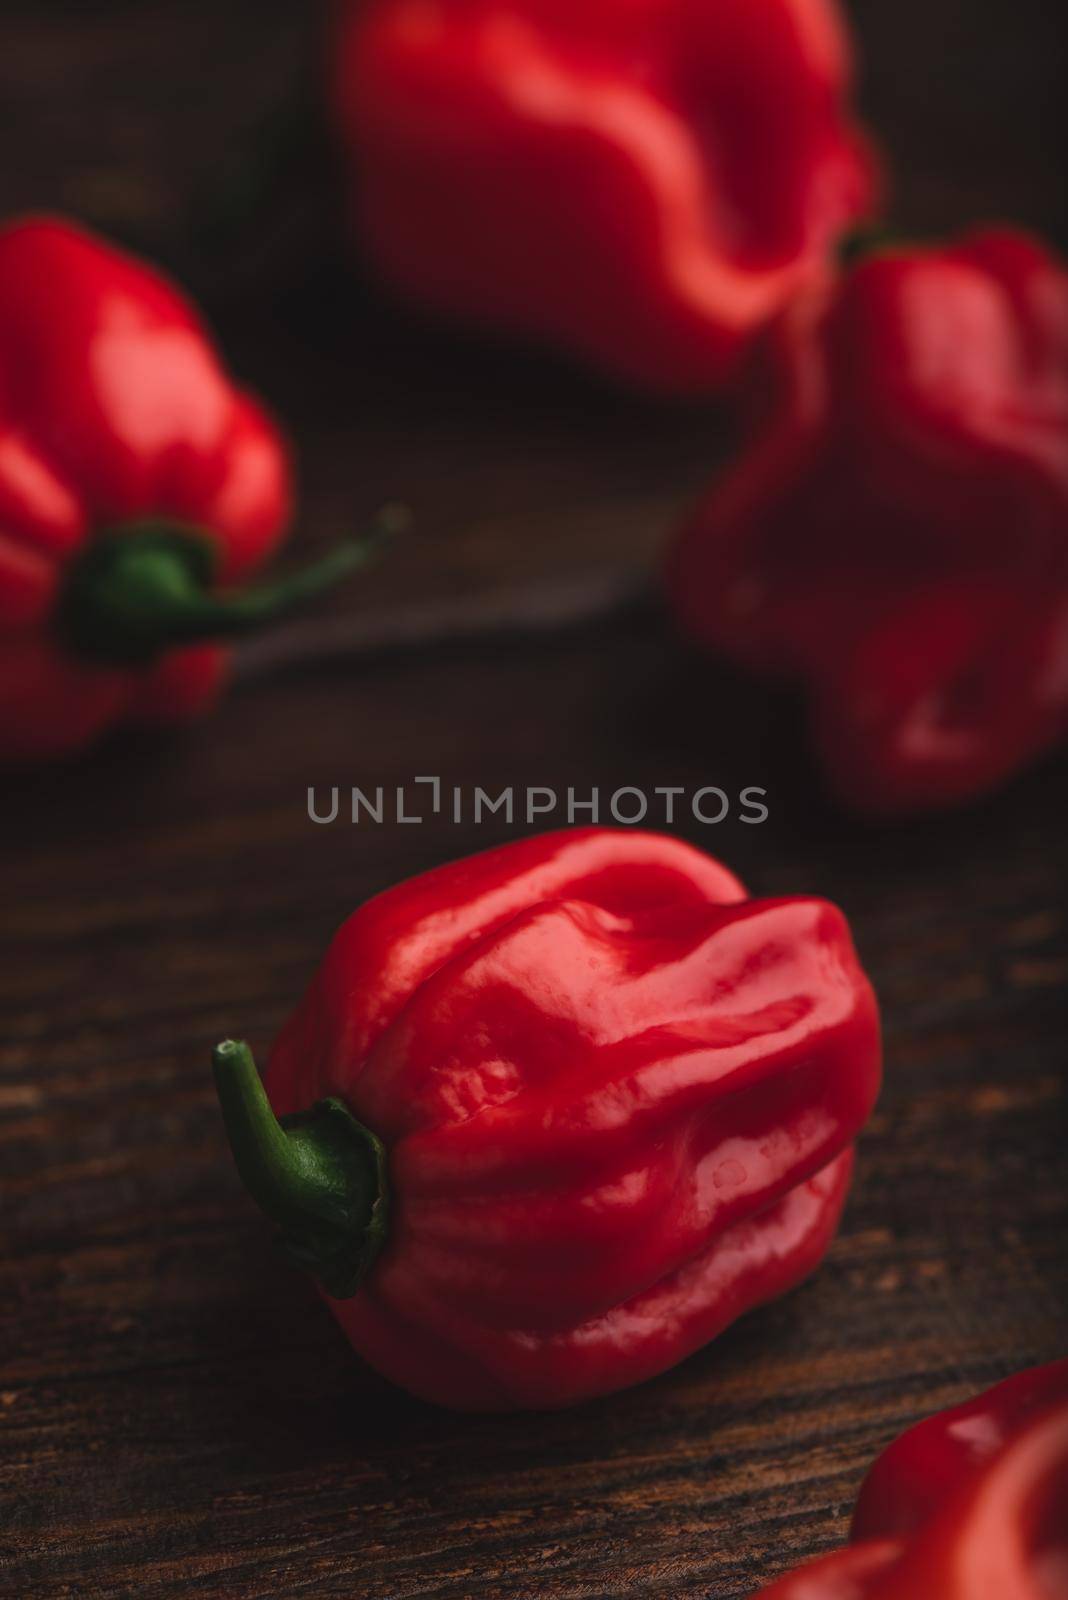 Red Habanero Pepper on a Wooden Table by Seva_blsv